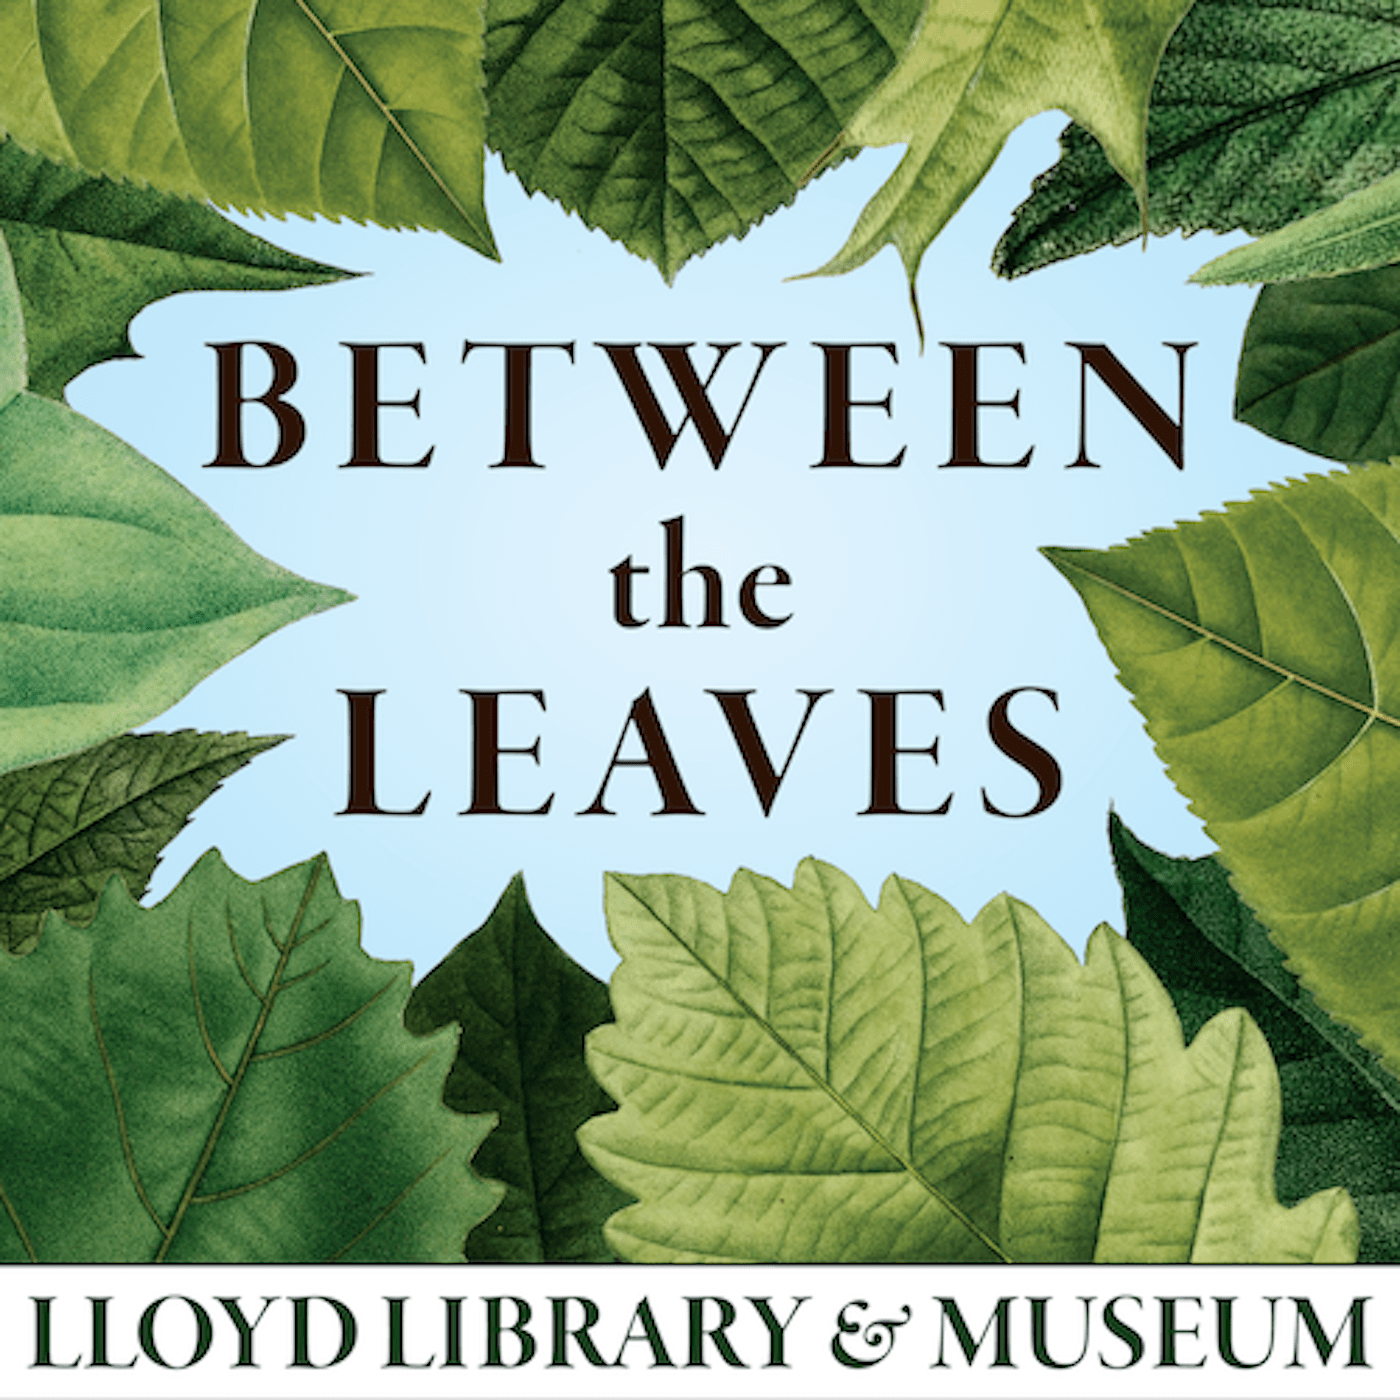 Between the Leaves at the Lloyd